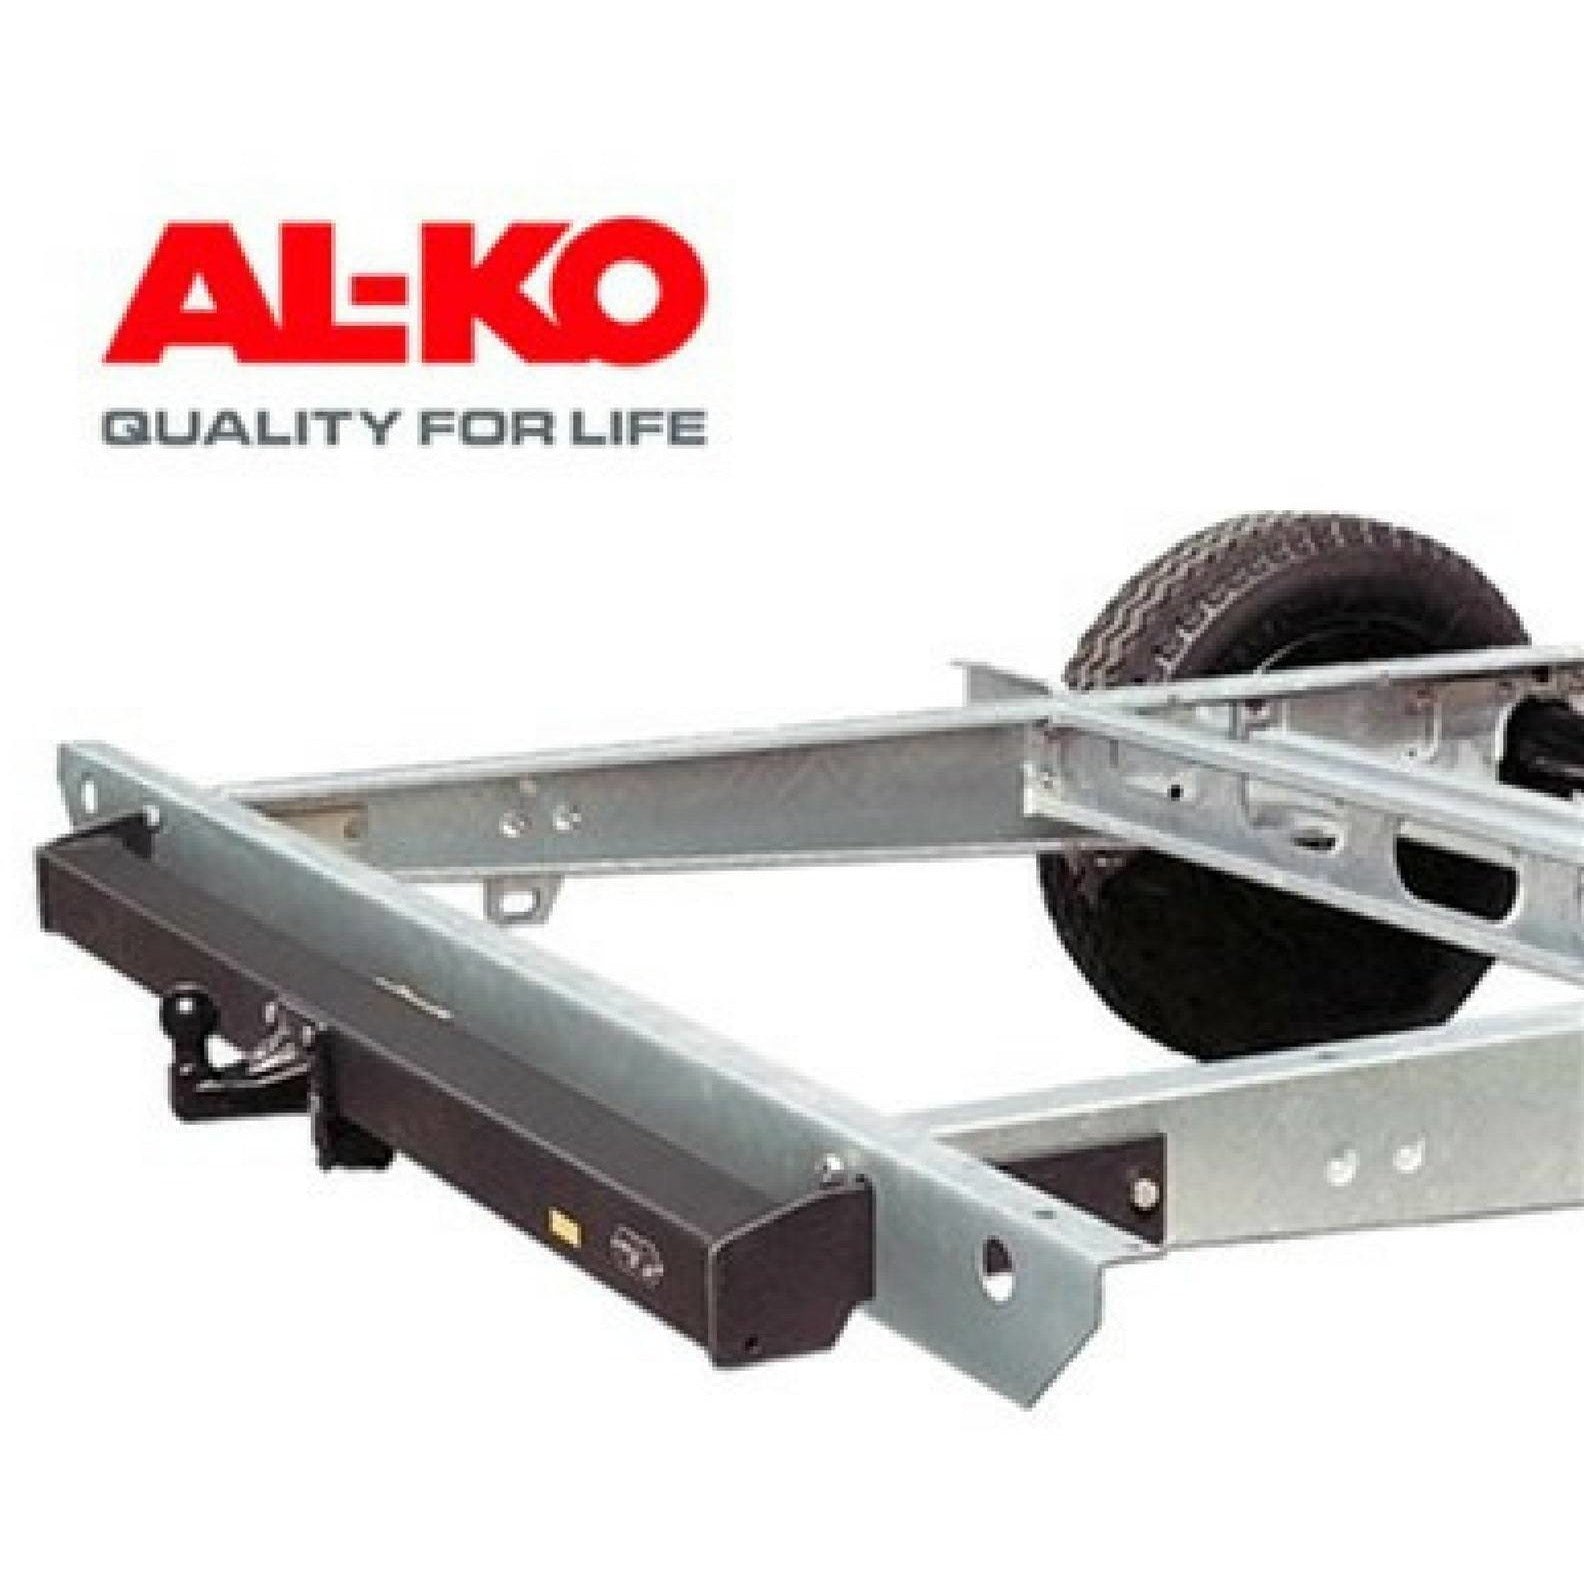 ALKO Towbar Assembly (1202141) made by ALKO. A Towing sold by Quality Caravan Awnings